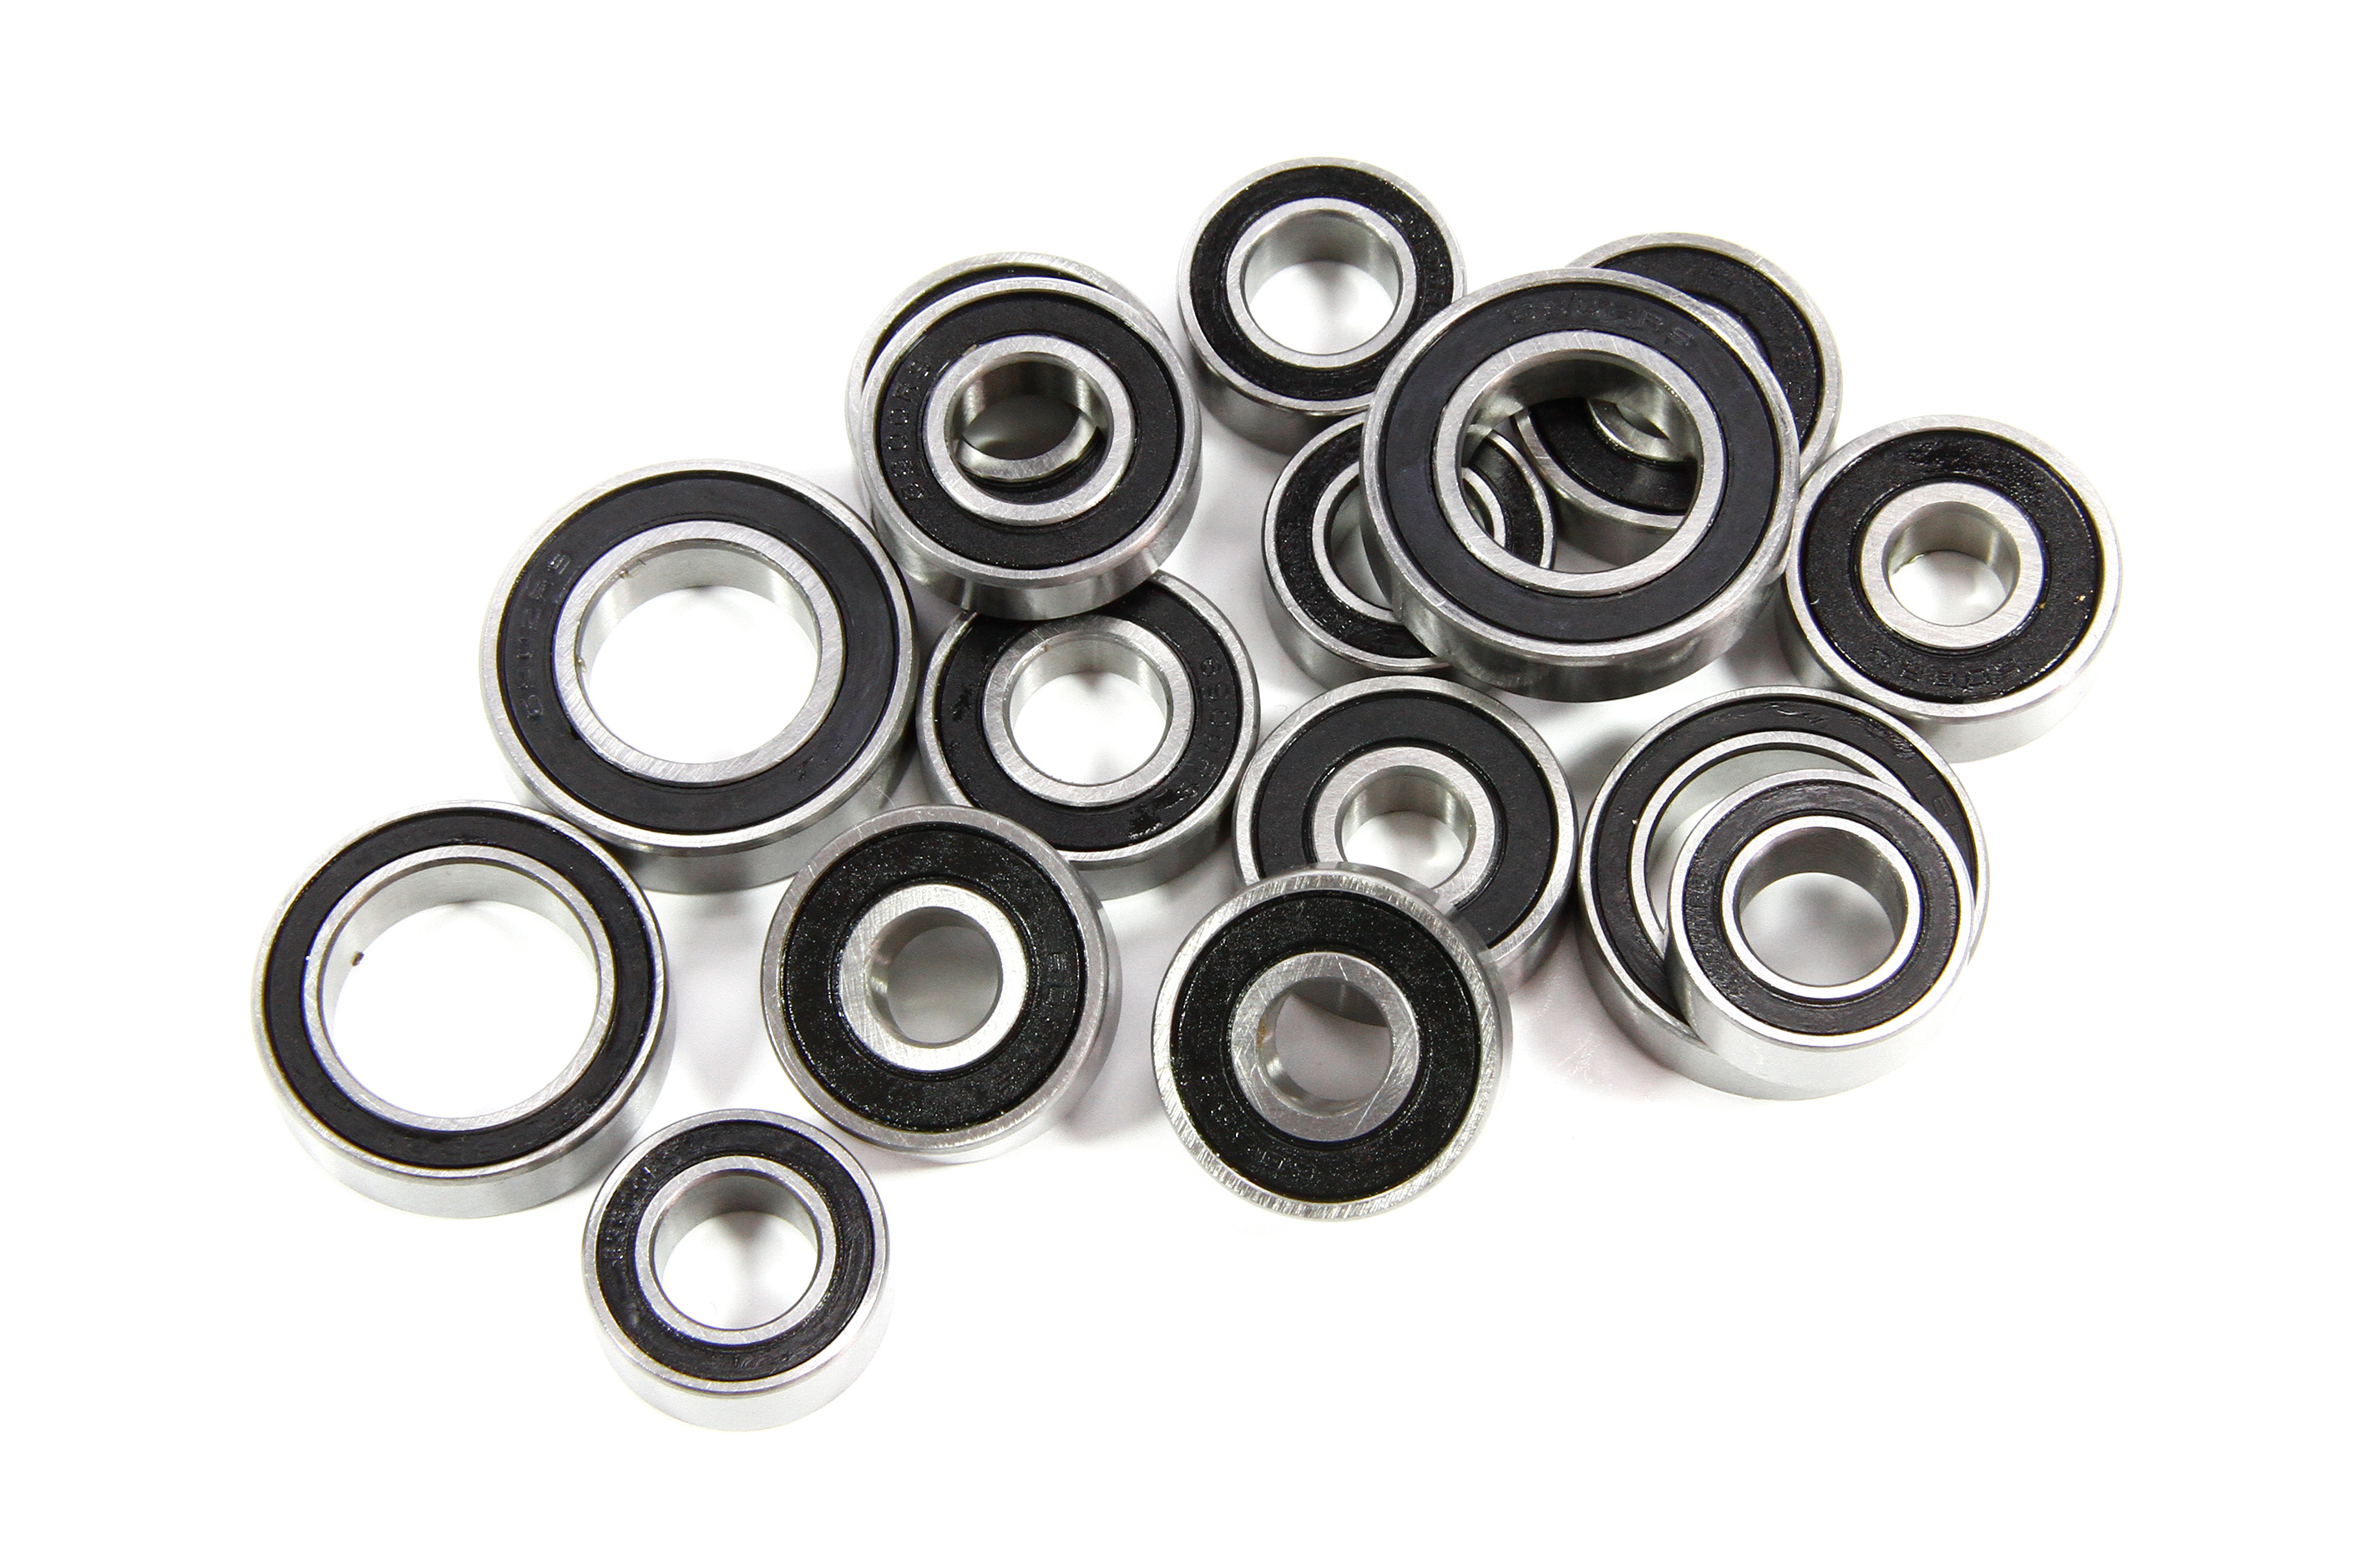 4411/11 FG ball bearing set for Leopard 2 Competitio, sealed, 16 pcs.